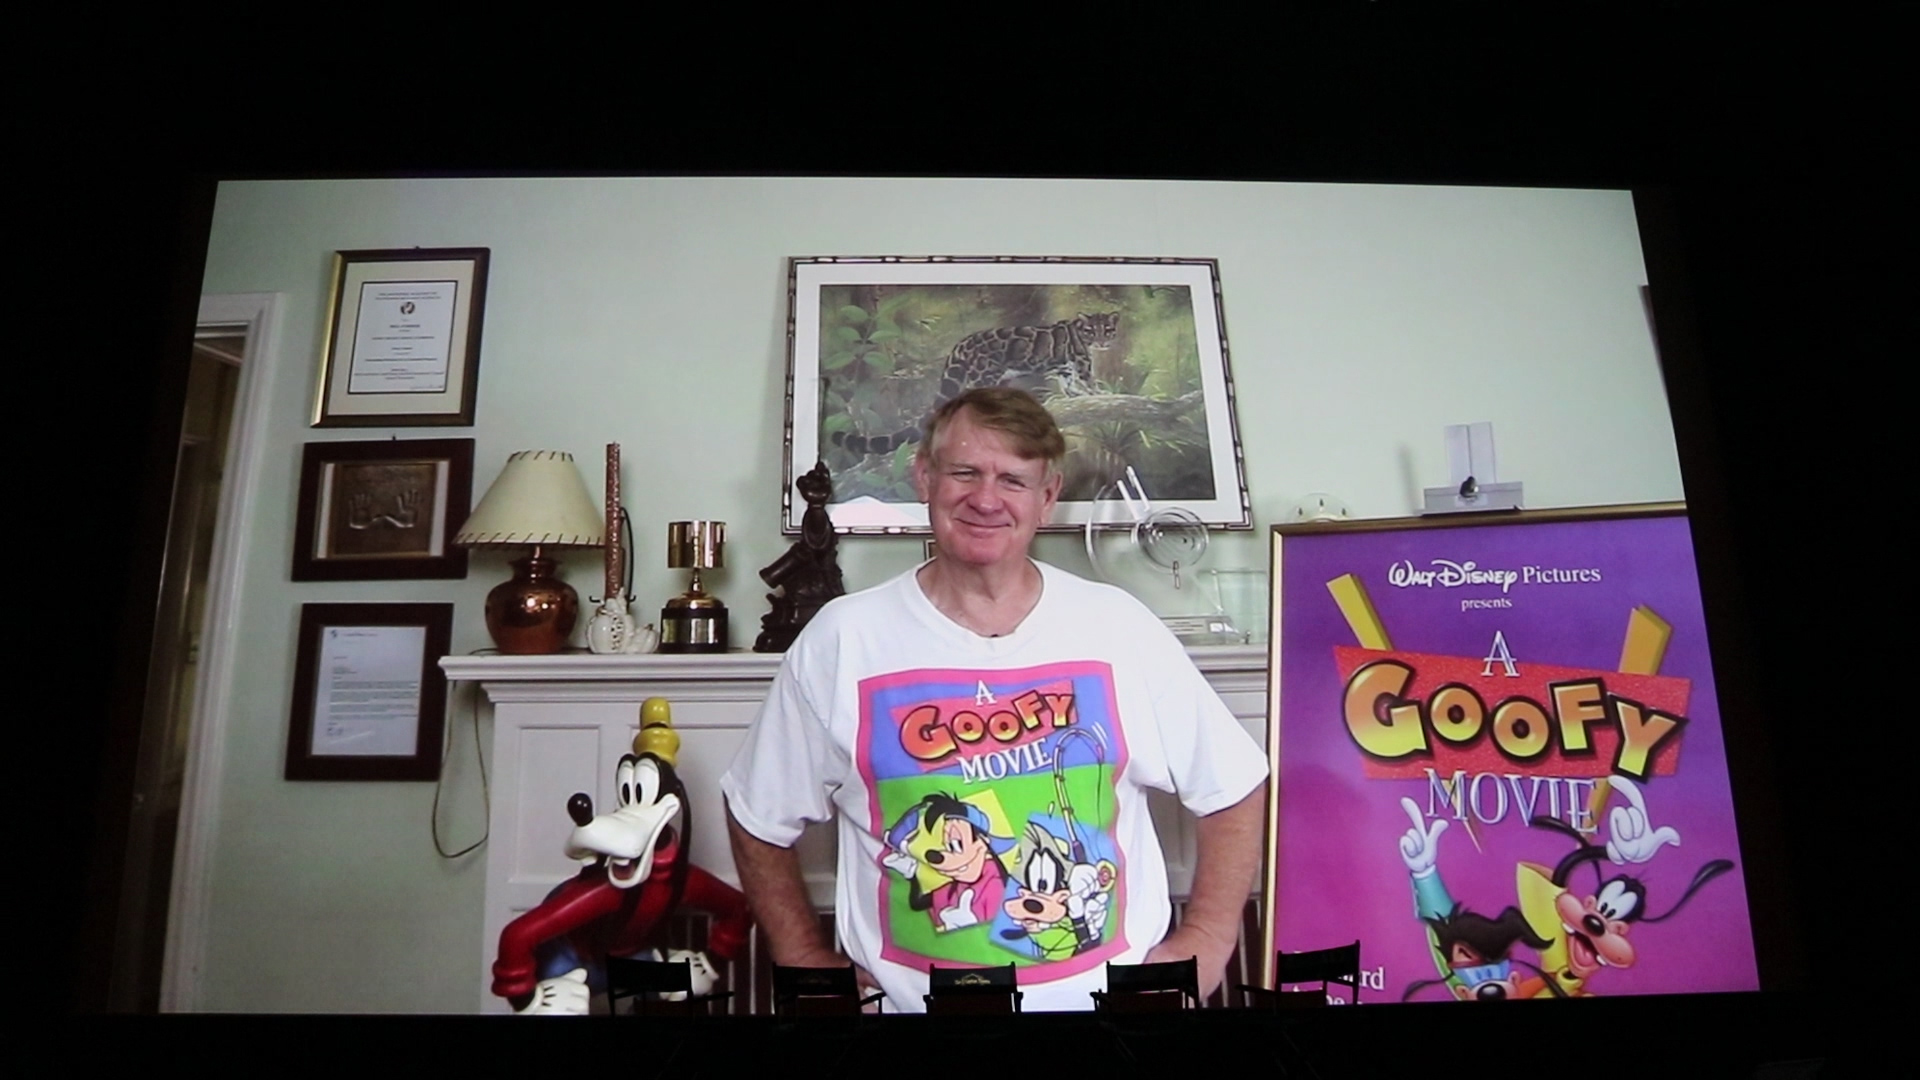 Bill Farmer surprises fans with a special video message thanking everyone for their support.